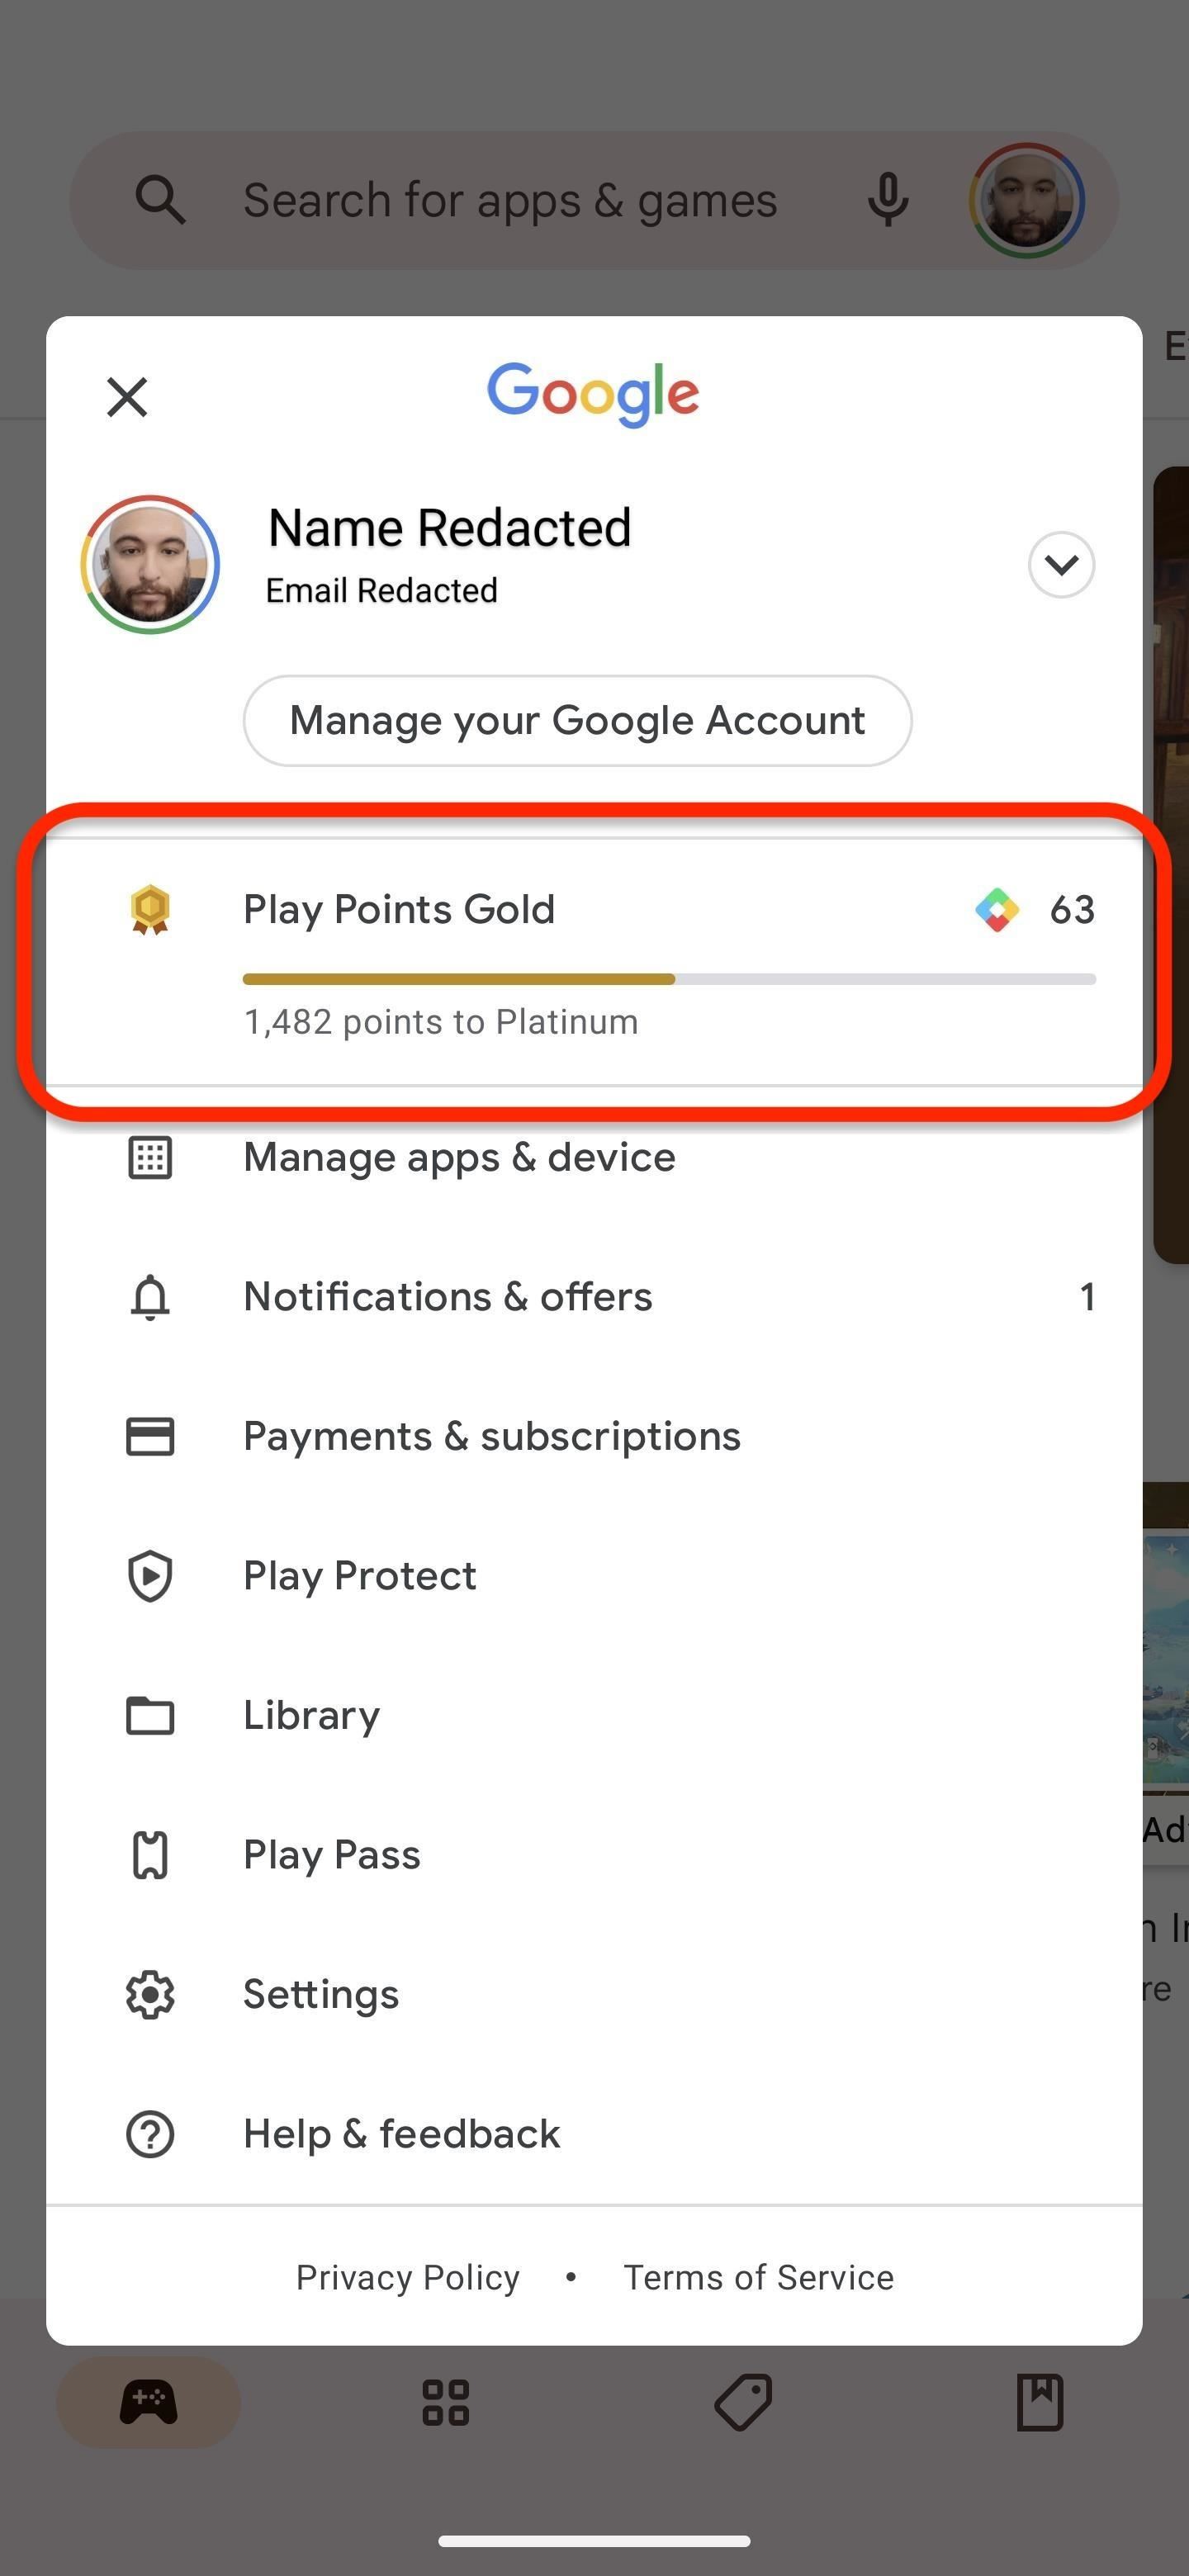 9 Ways to Earn Google Play Store Credit and Discounts for Apps, Games, In-App Items, Movies, and More